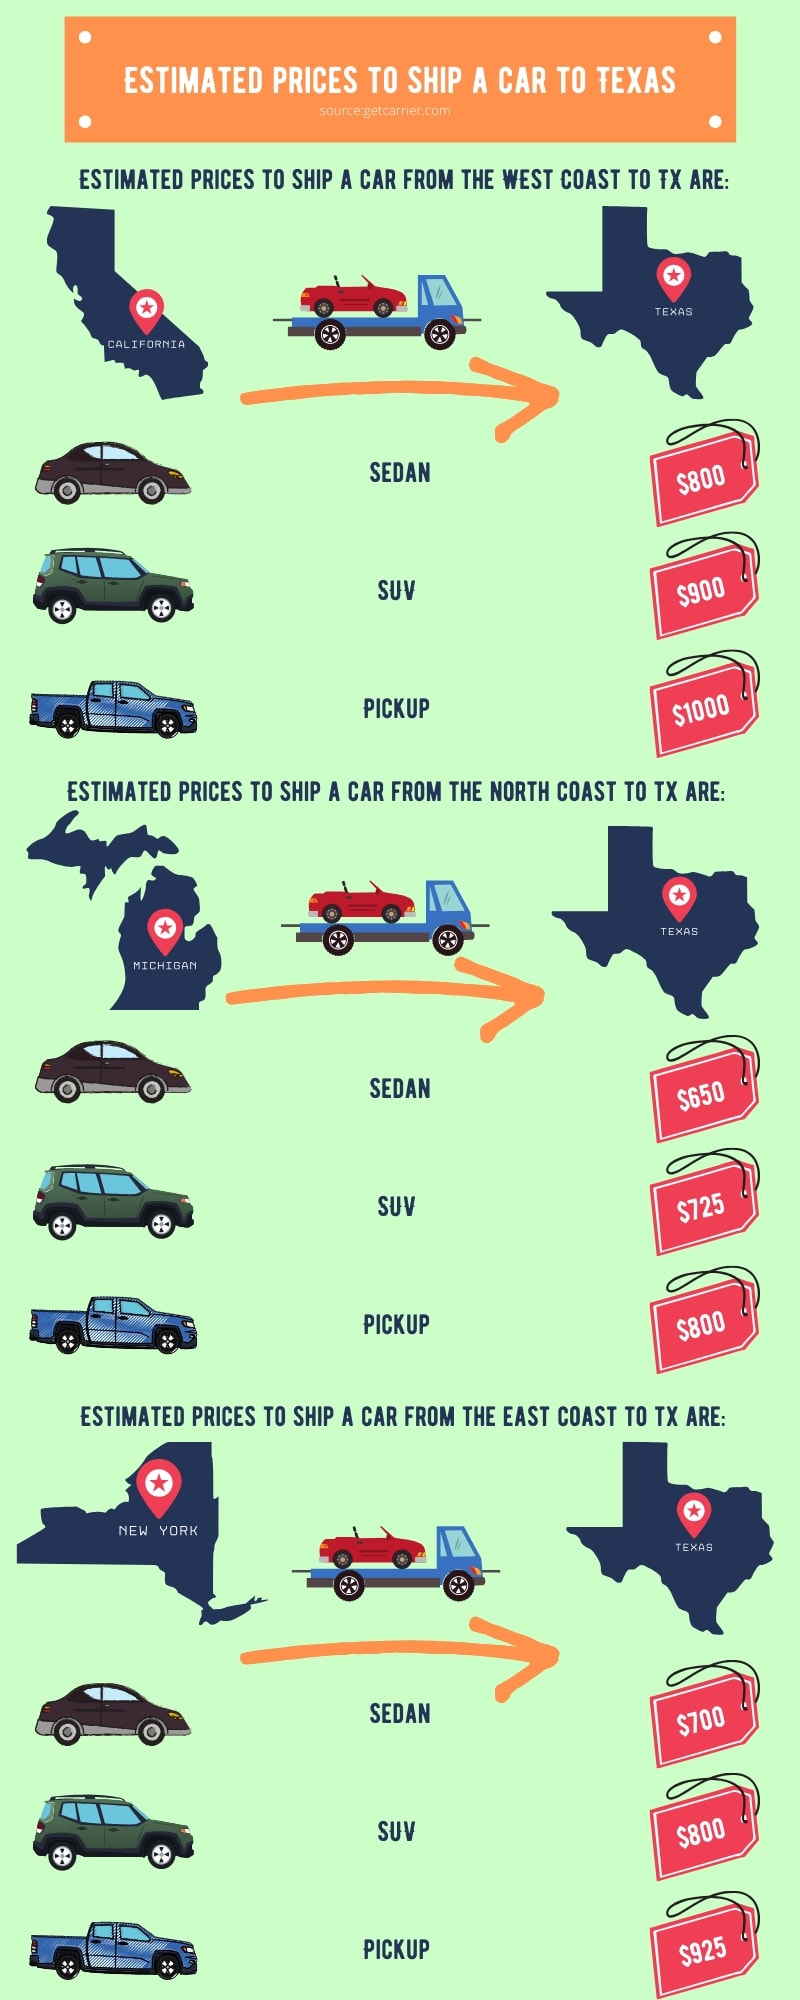 Estimated prices to ship a car to Texas infographic